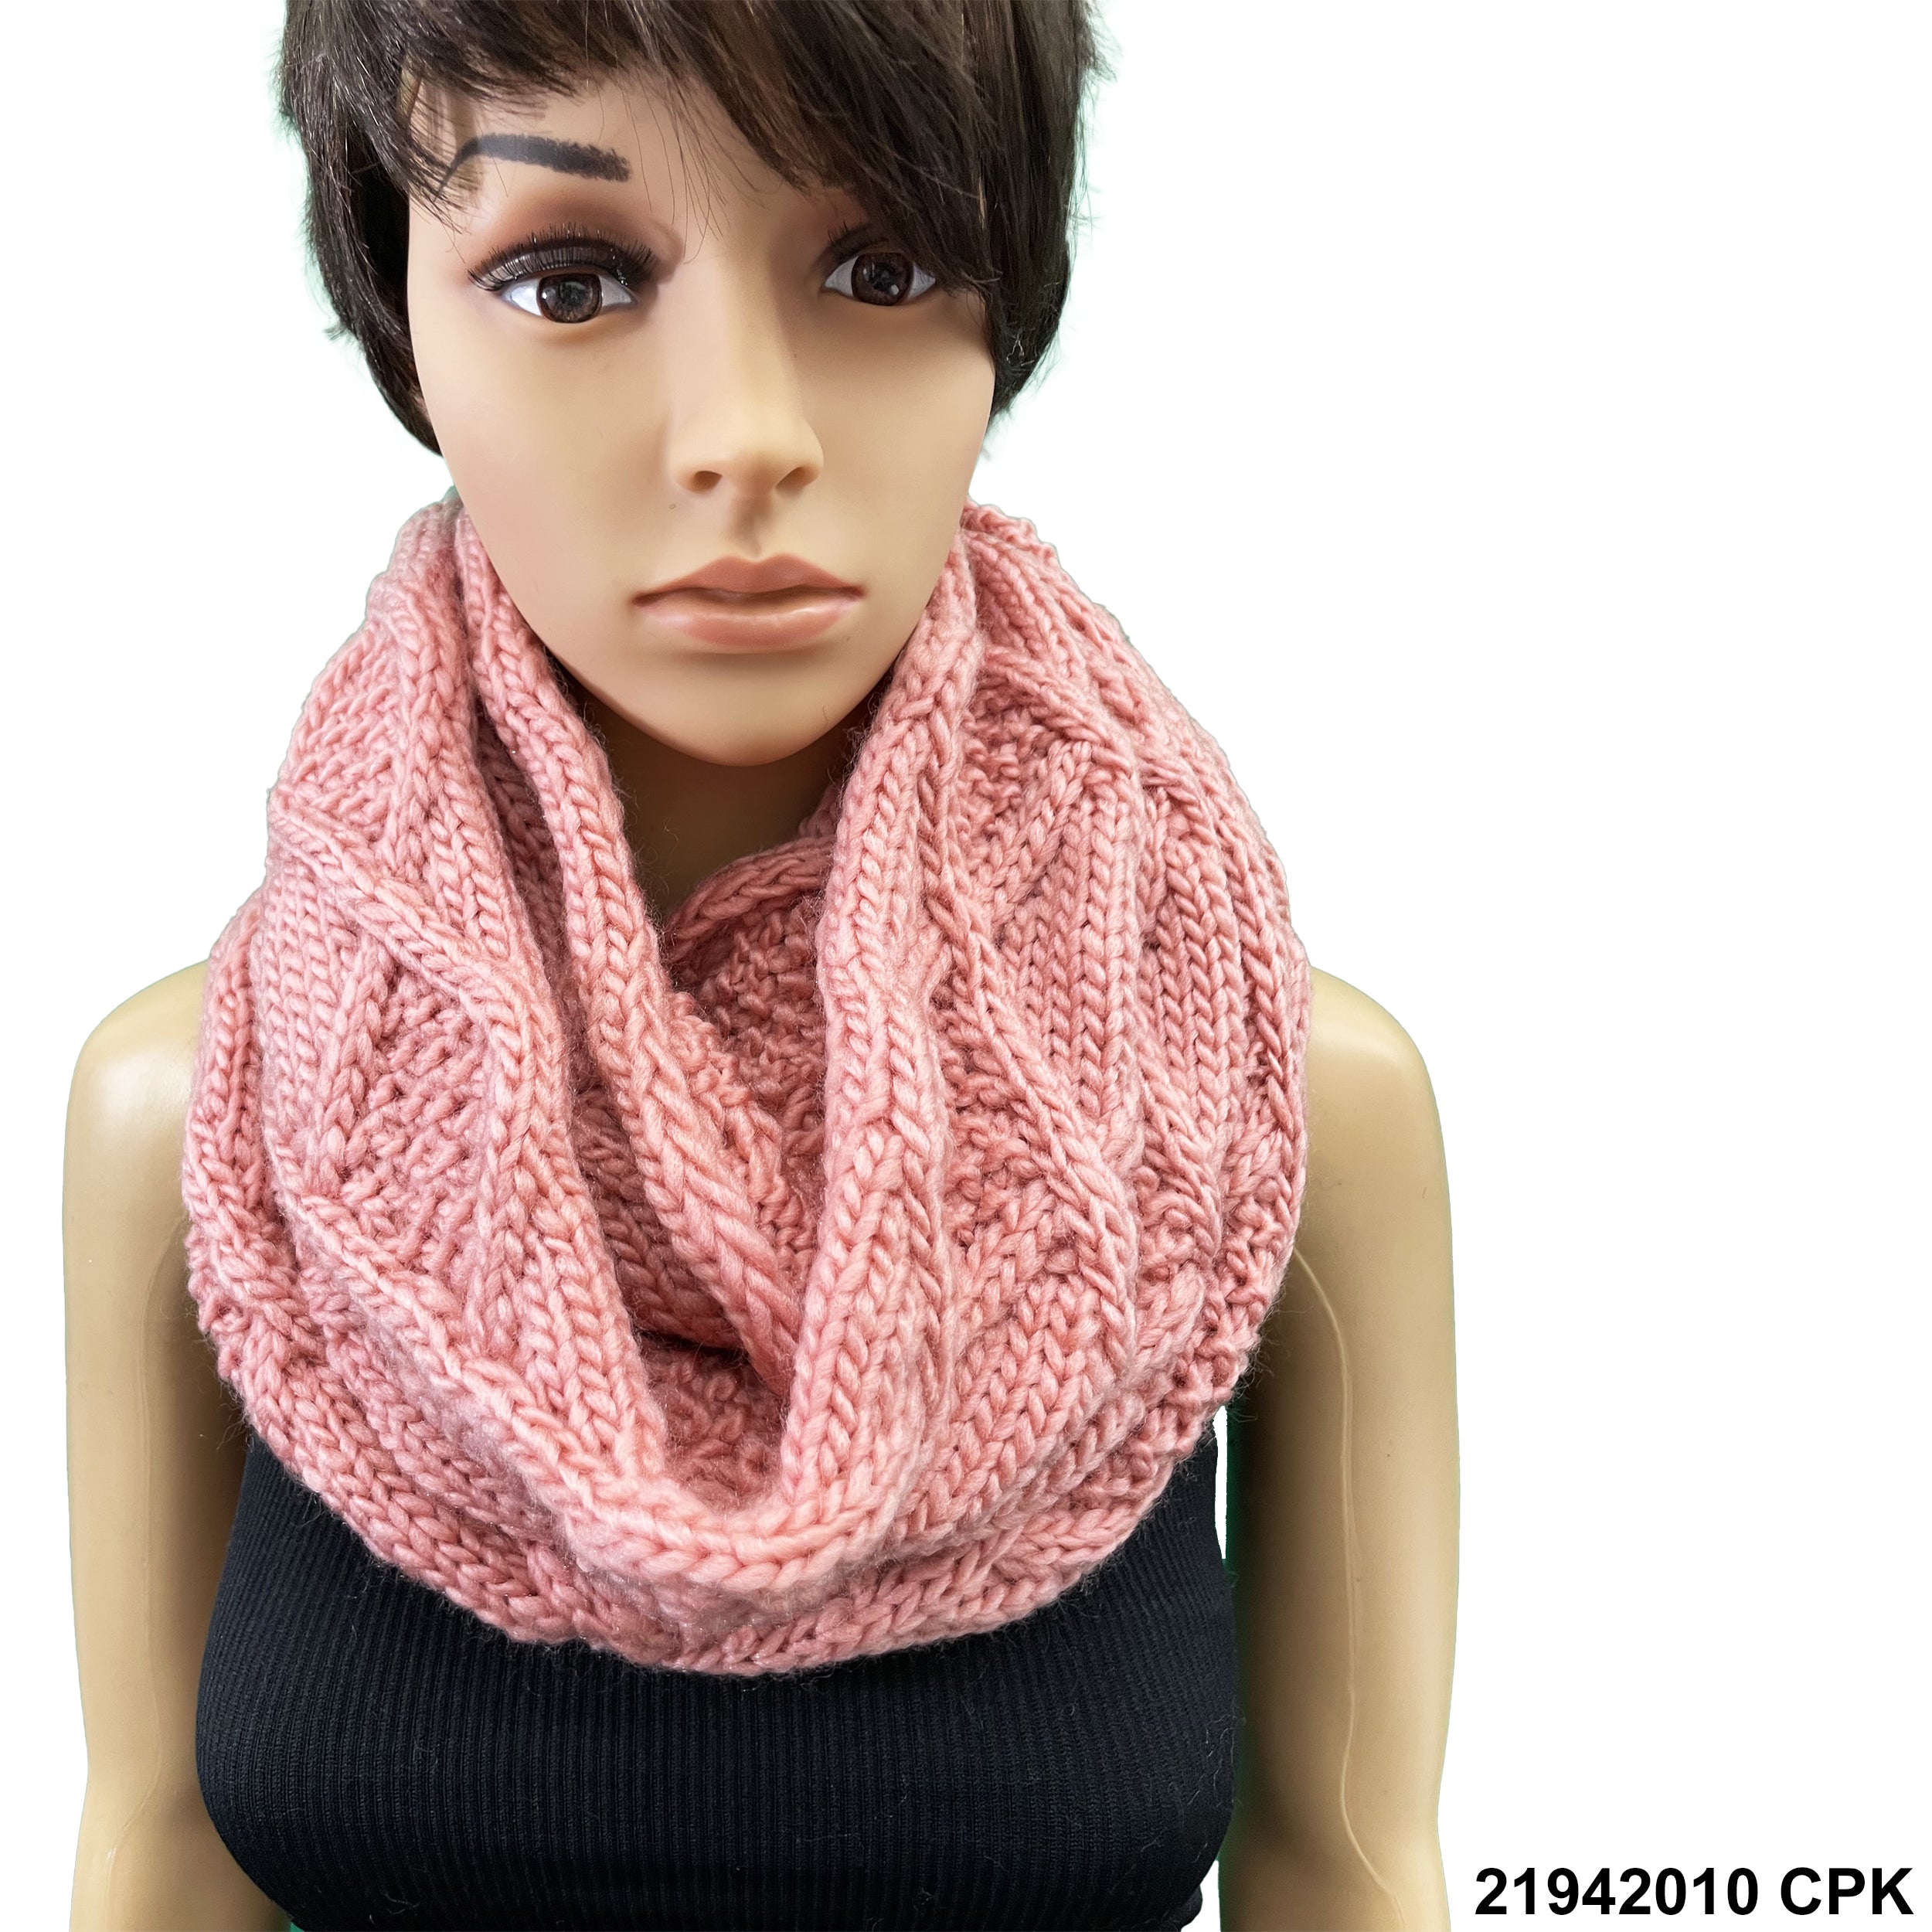 Knitted Wool Infinity Leaf Scarf 21942010 CPK